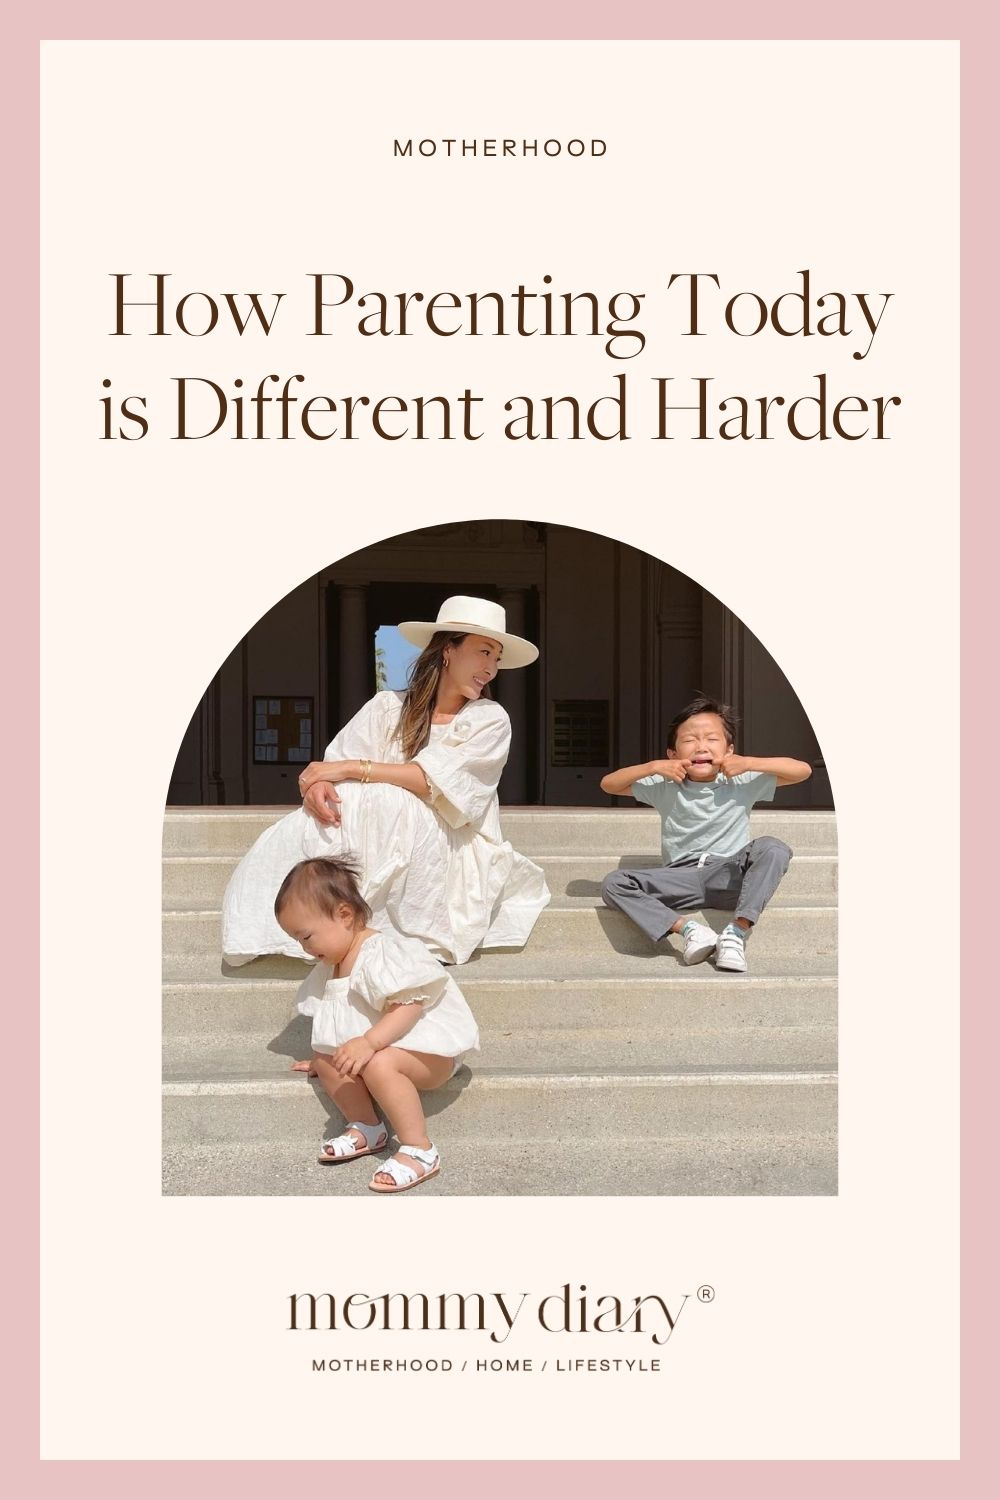 How Parenting Today is Different and Harder